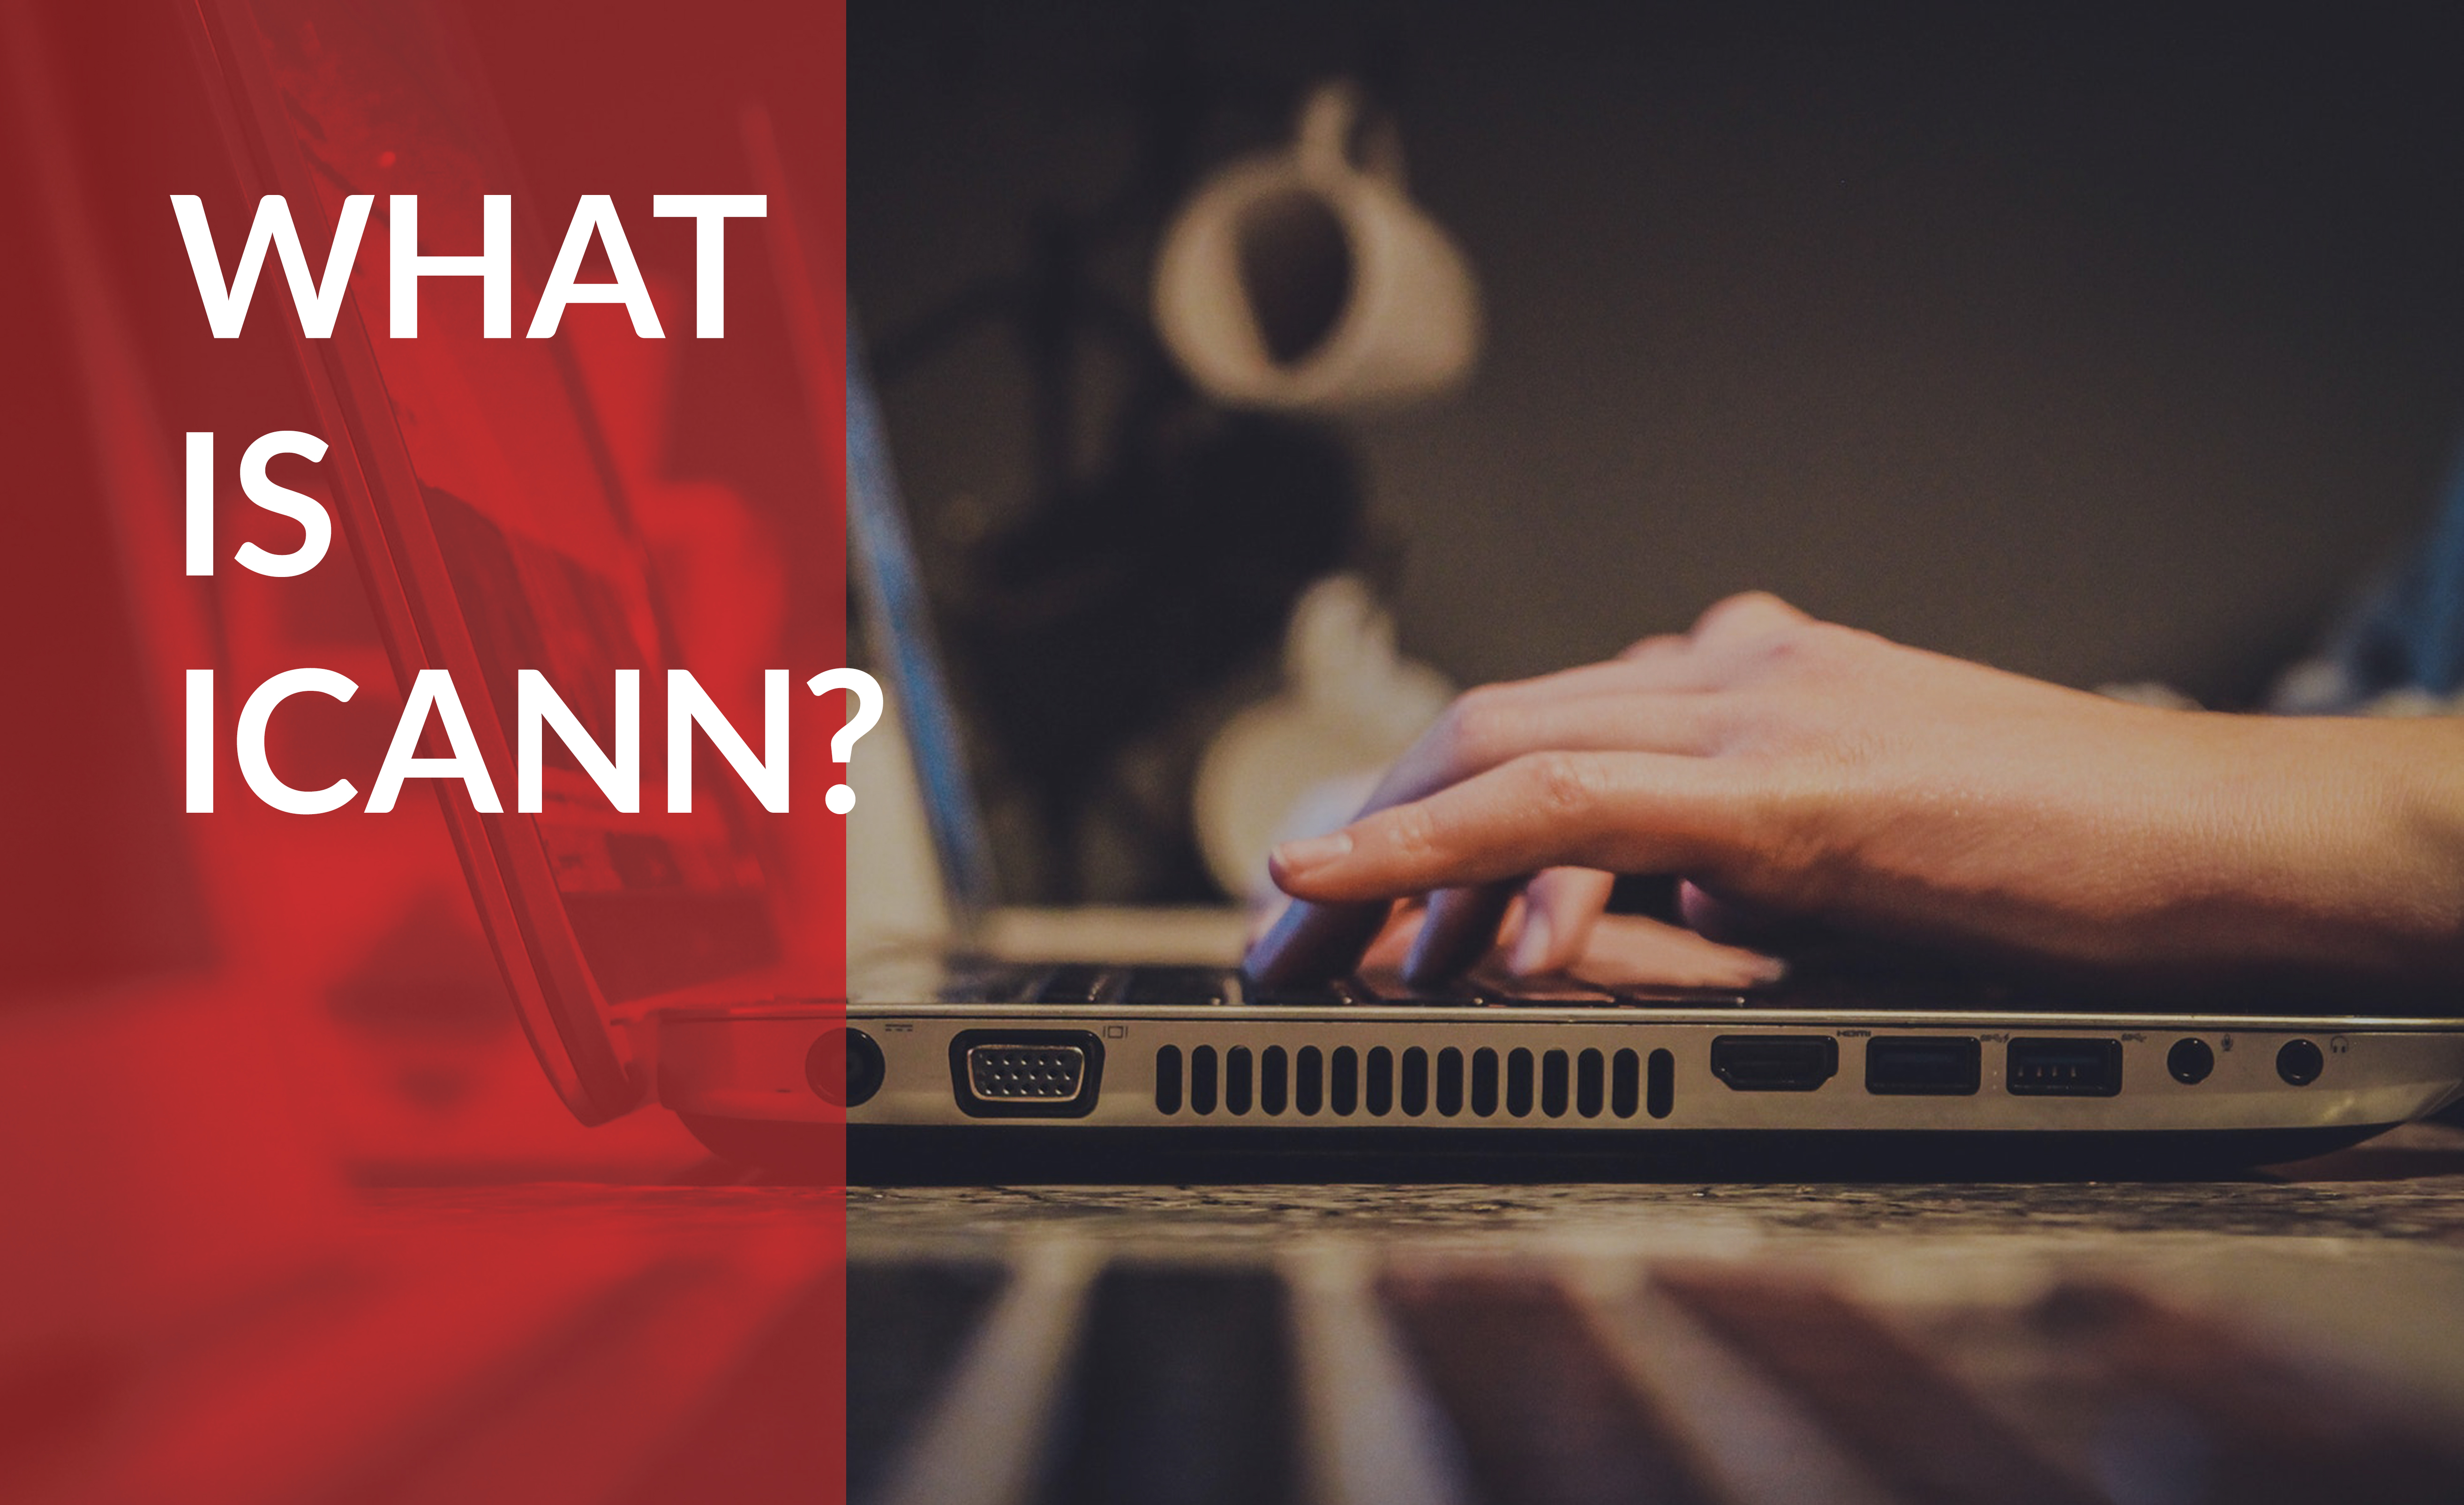 Find out how ICANN affects your website and your business.